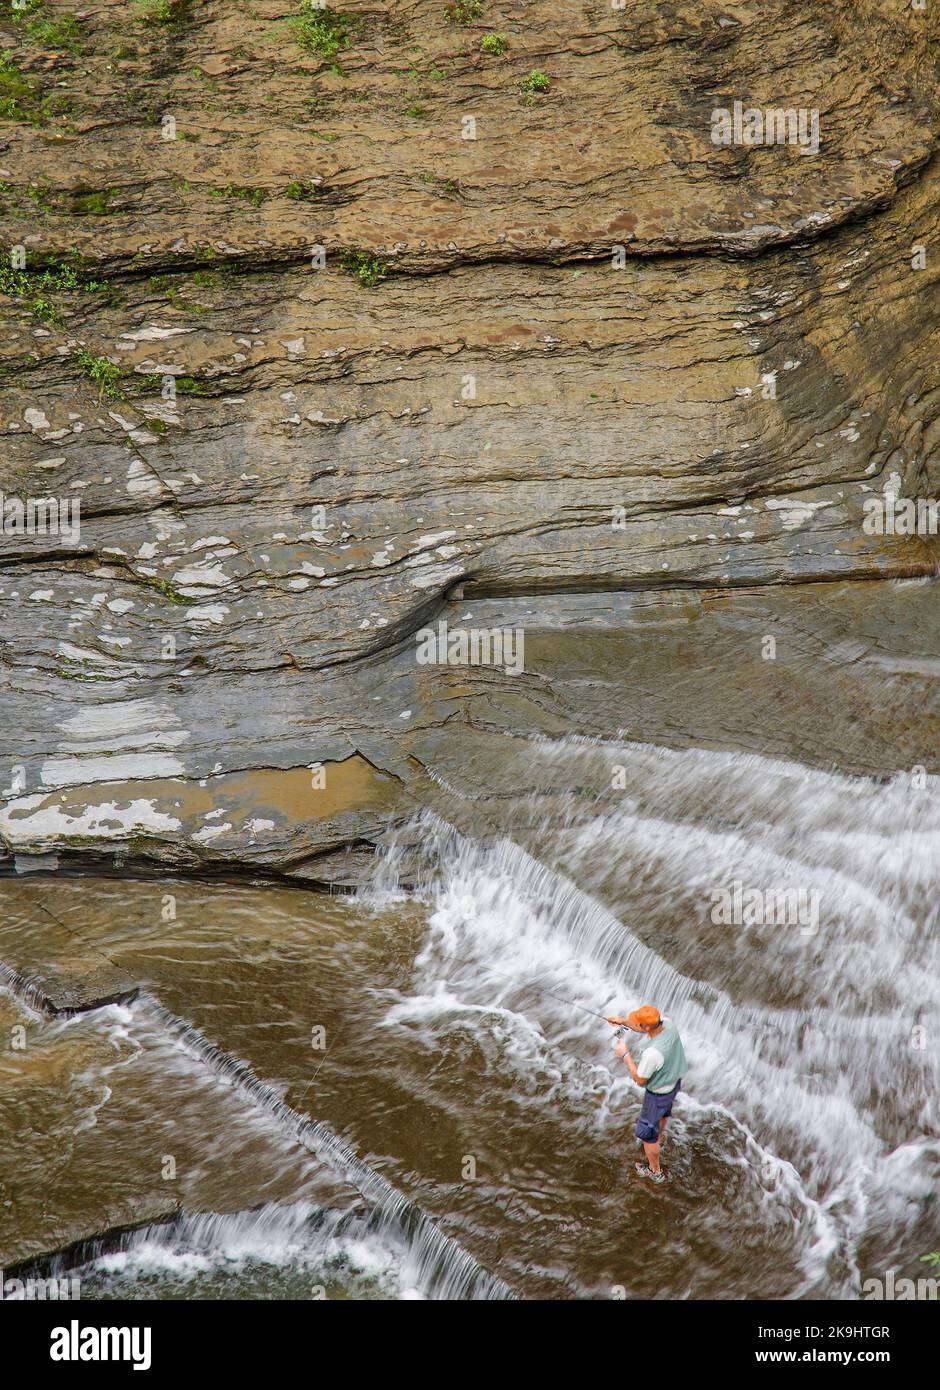 Fly Fisherman in Enfield Creek Gorge, Robert Treman State Park, Tompkins County, New York Stock Photo